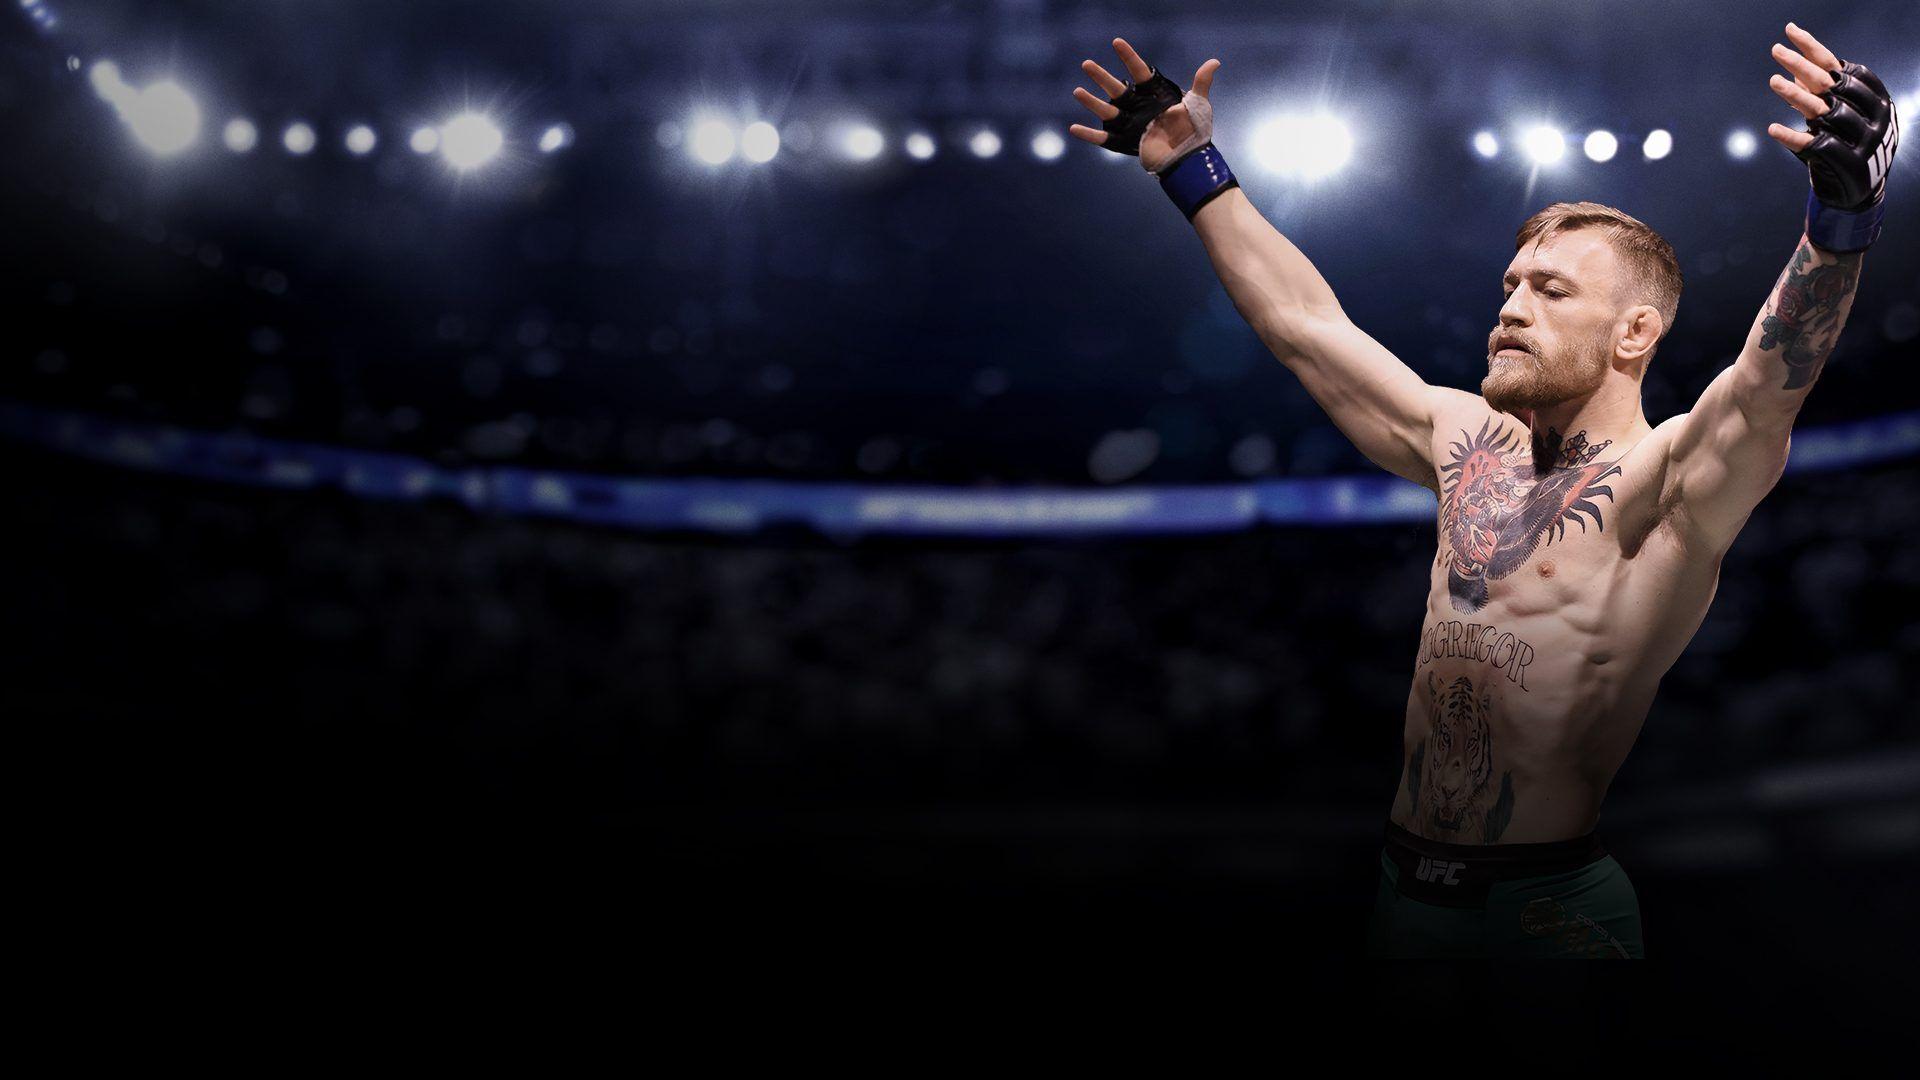 Save EA Sports UFC 3 HD Wallpaper. Read games reviews, play online